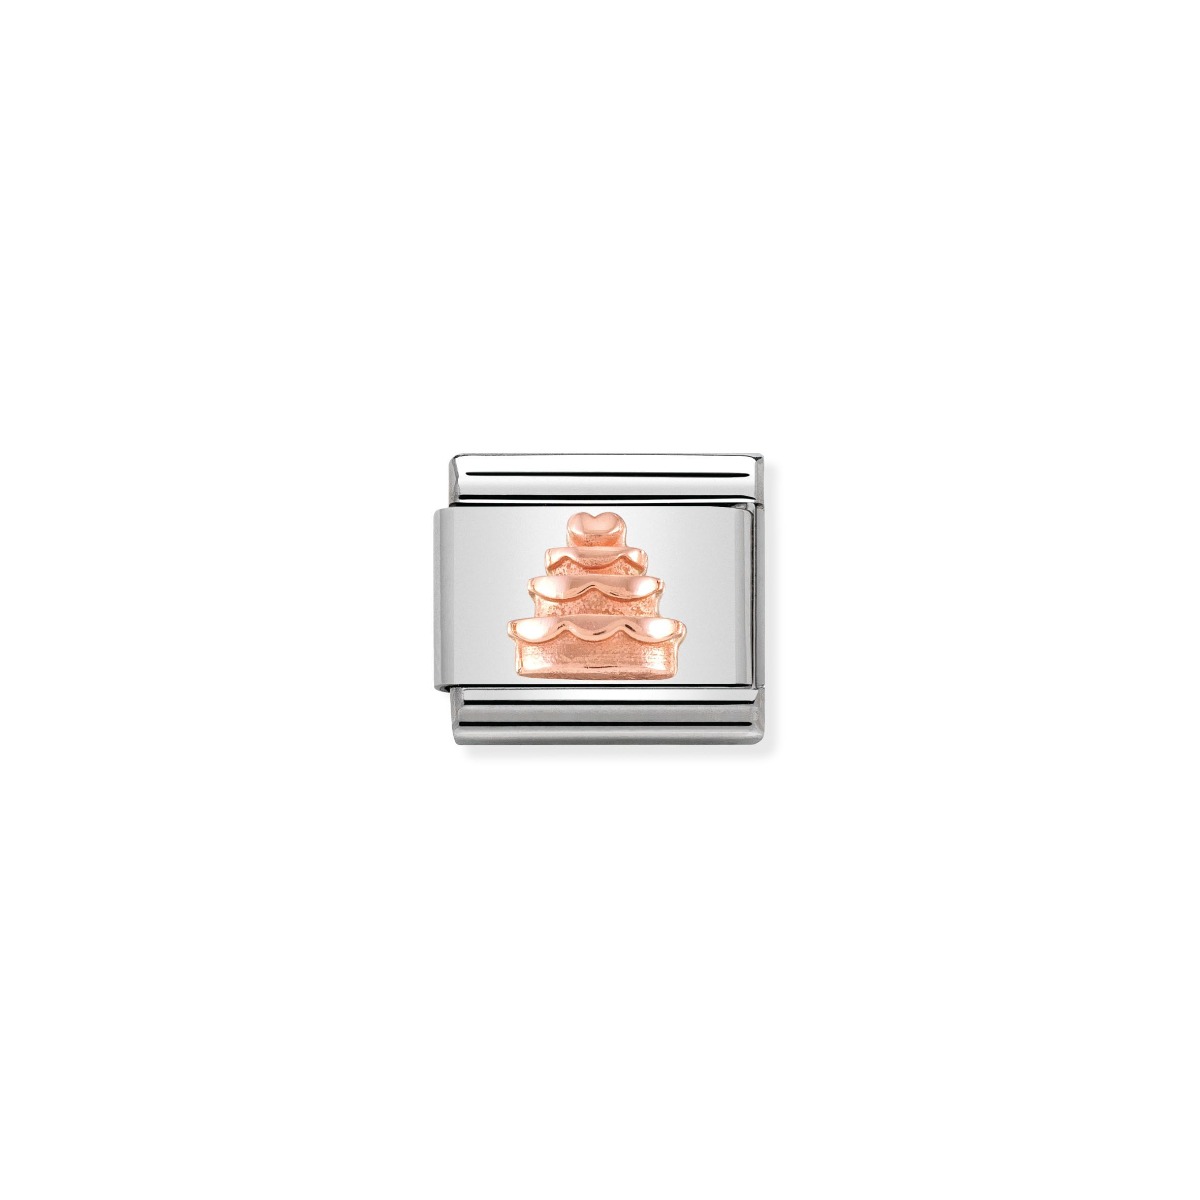 Nomination Rose Gold Classic Tiered Cake Charm - 430106/02